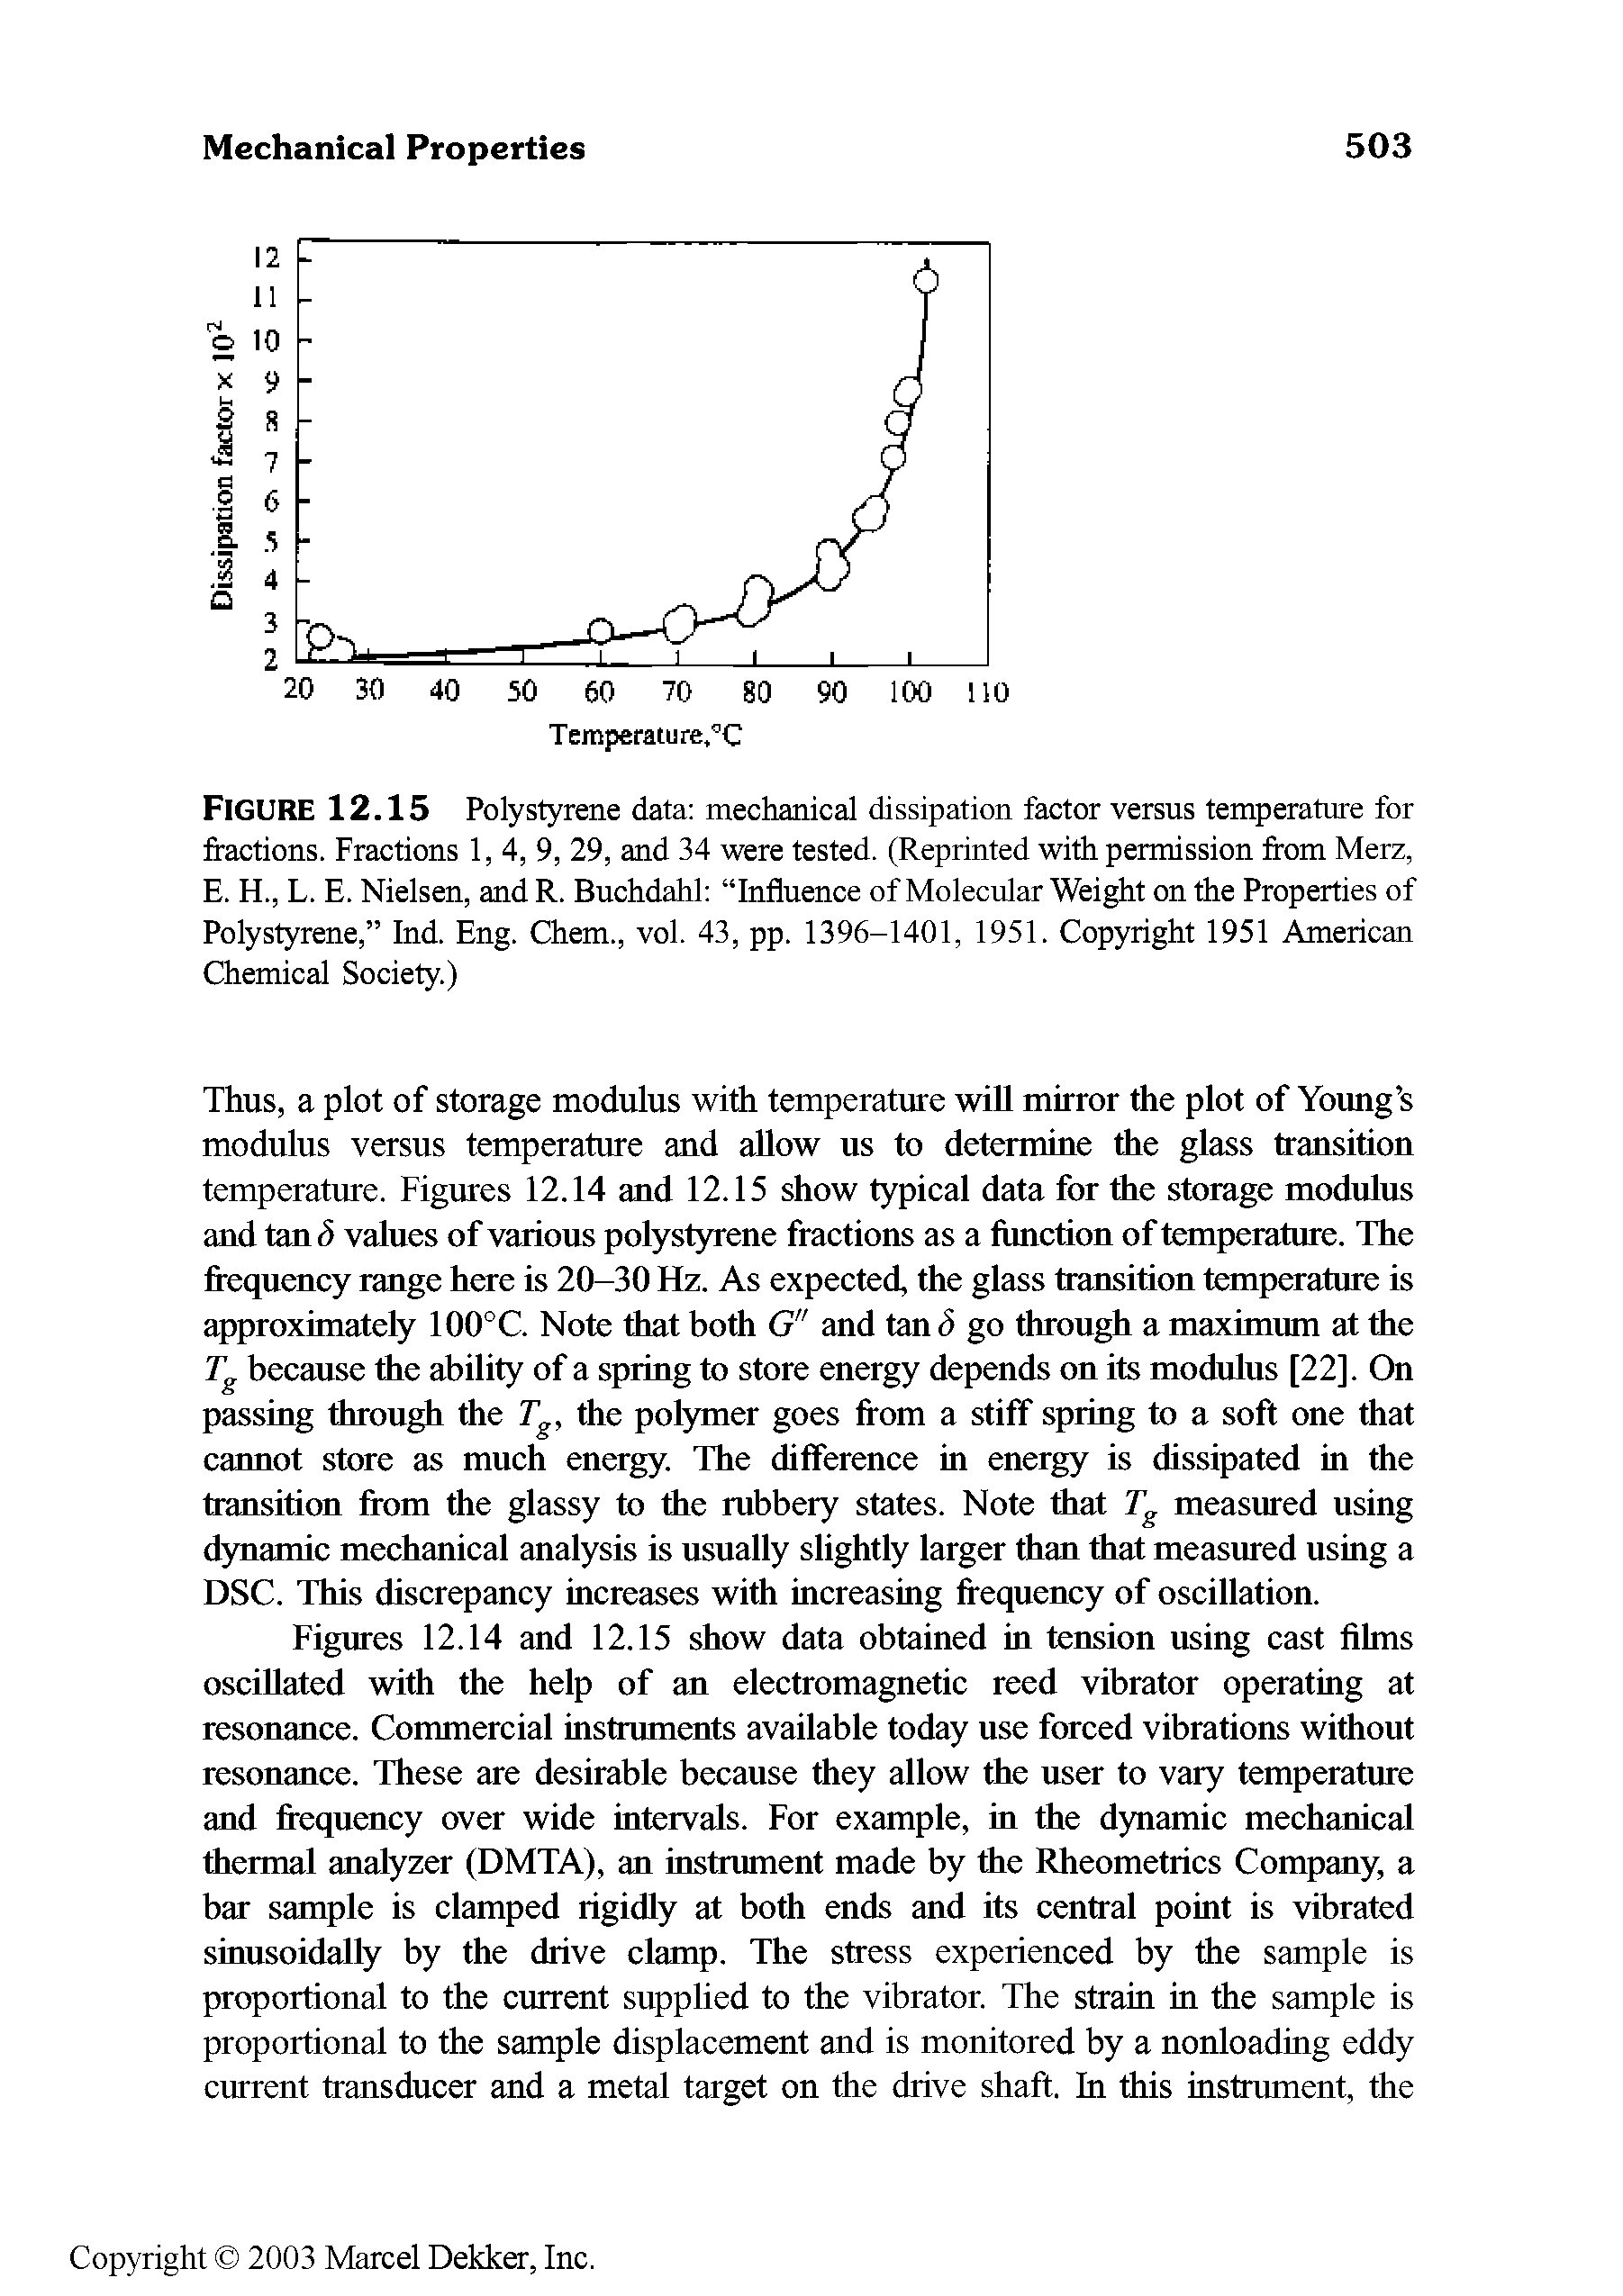 Figure 12.15 Polystyrene data mechanical dissipation factor versus temperature for fractions. Fractions 1, 4, 9, 29, and 34 were tested. (Reprinted with permission from Merz, E. H., L. E. Nielsen, and R. Buchdahl Influence of Molecular Weight on the Properties of Polystyrene, Ind. Eng. Chem., vol. 43, pp. 1396-1401, 1951. Cop3night 1951 American Chemical Society.)...